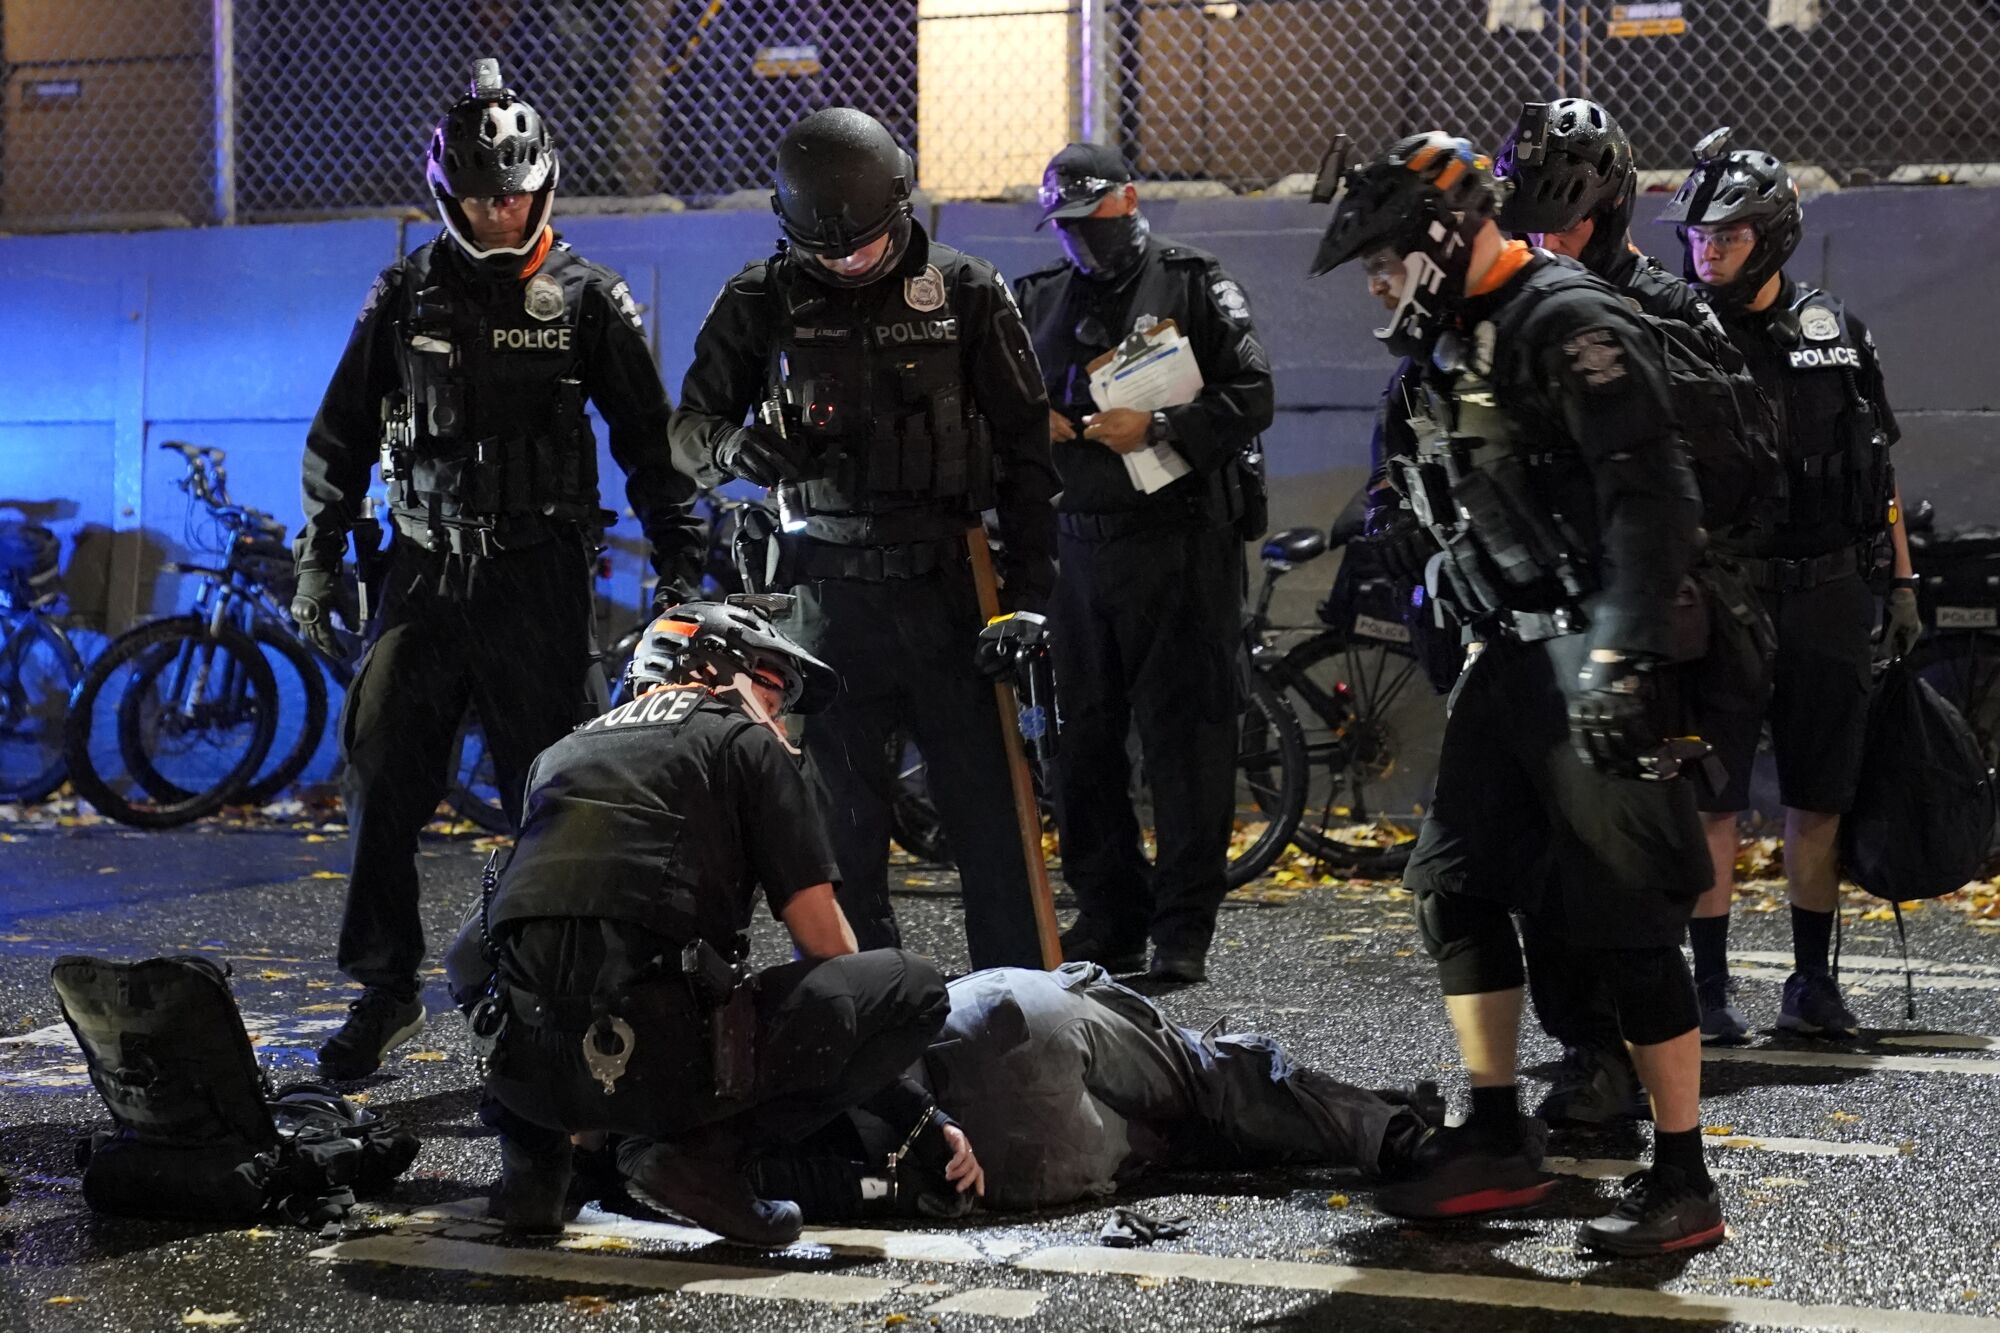 Police officials attend an injured man detained during a protest after the Nov. 3 elections in Seattle.